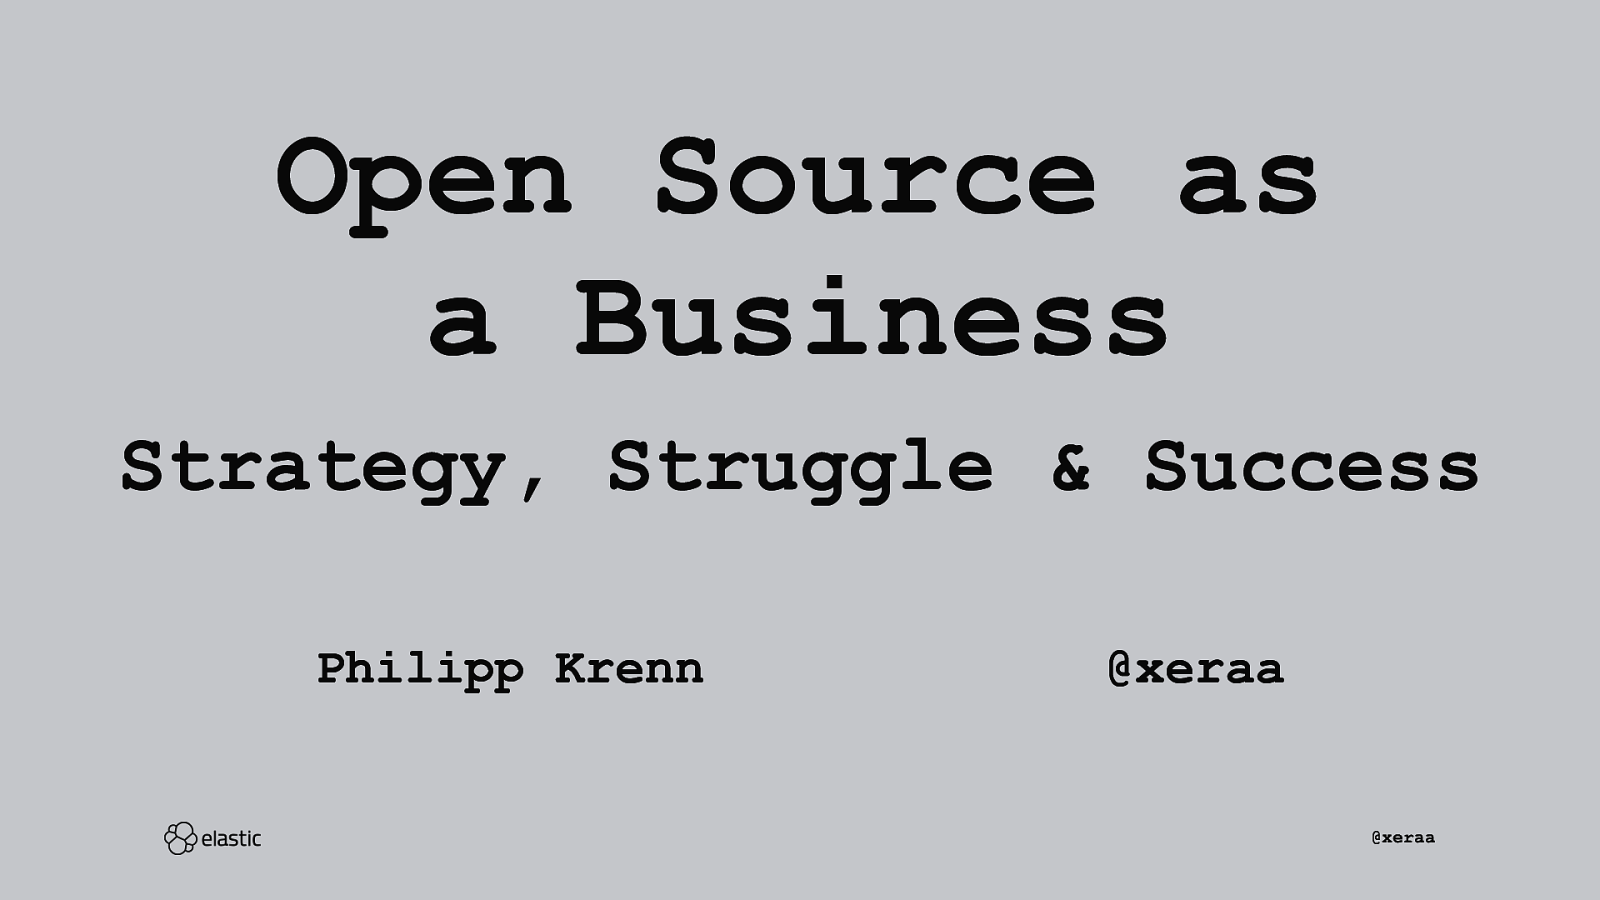 Open Source as a Business: Strategy, Struggle & Success